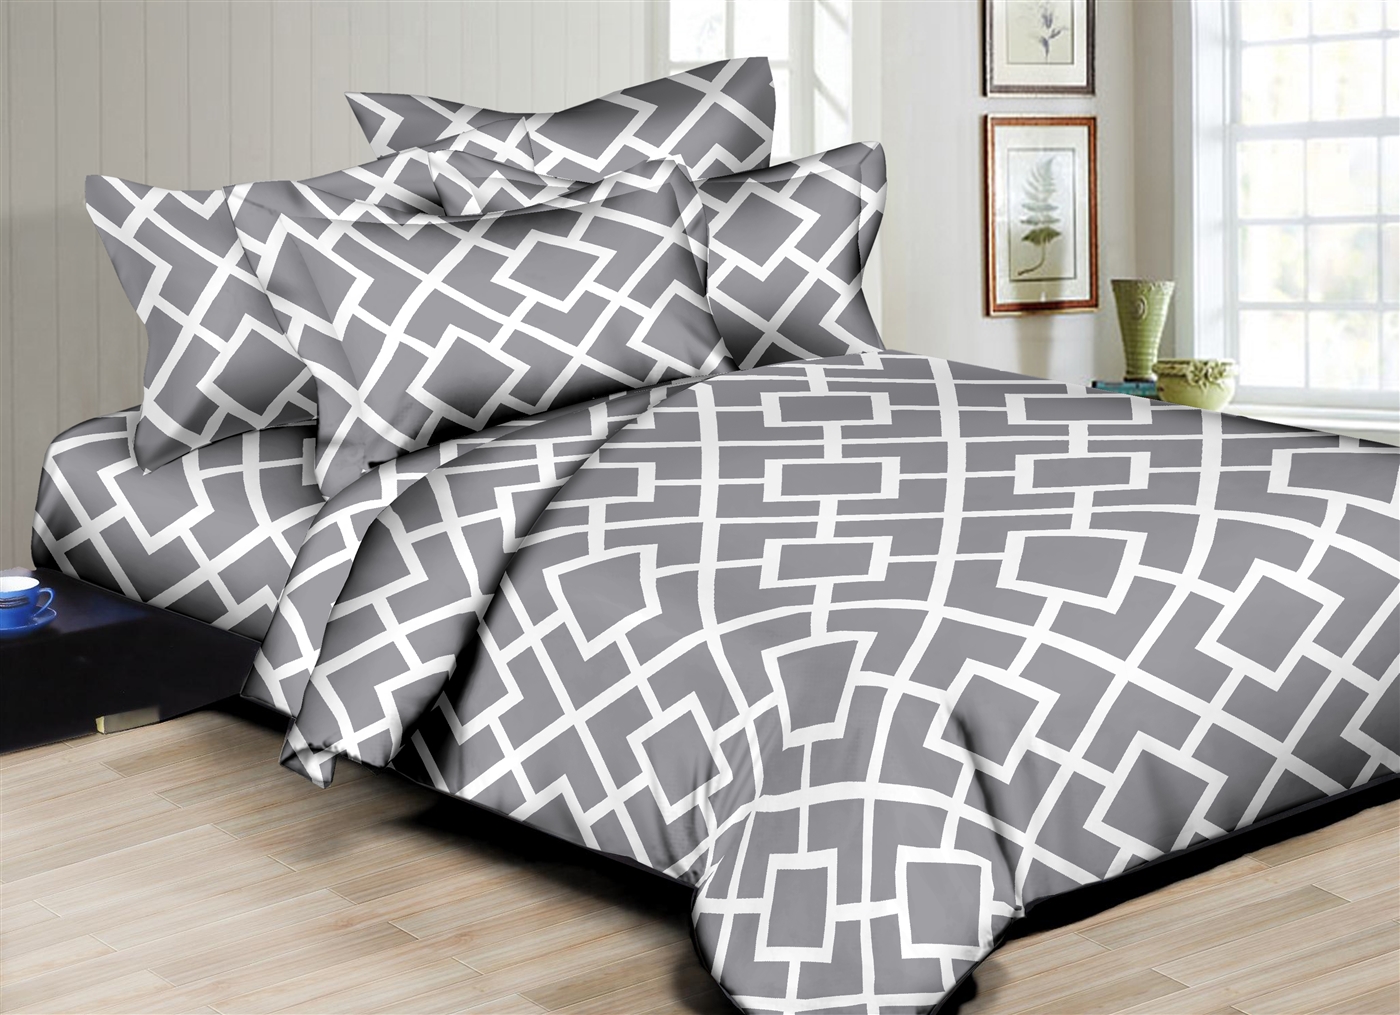 Better Bed Collection :Interlocking Squares- Grey 8PC Bedding Sets - 300 Thread Count